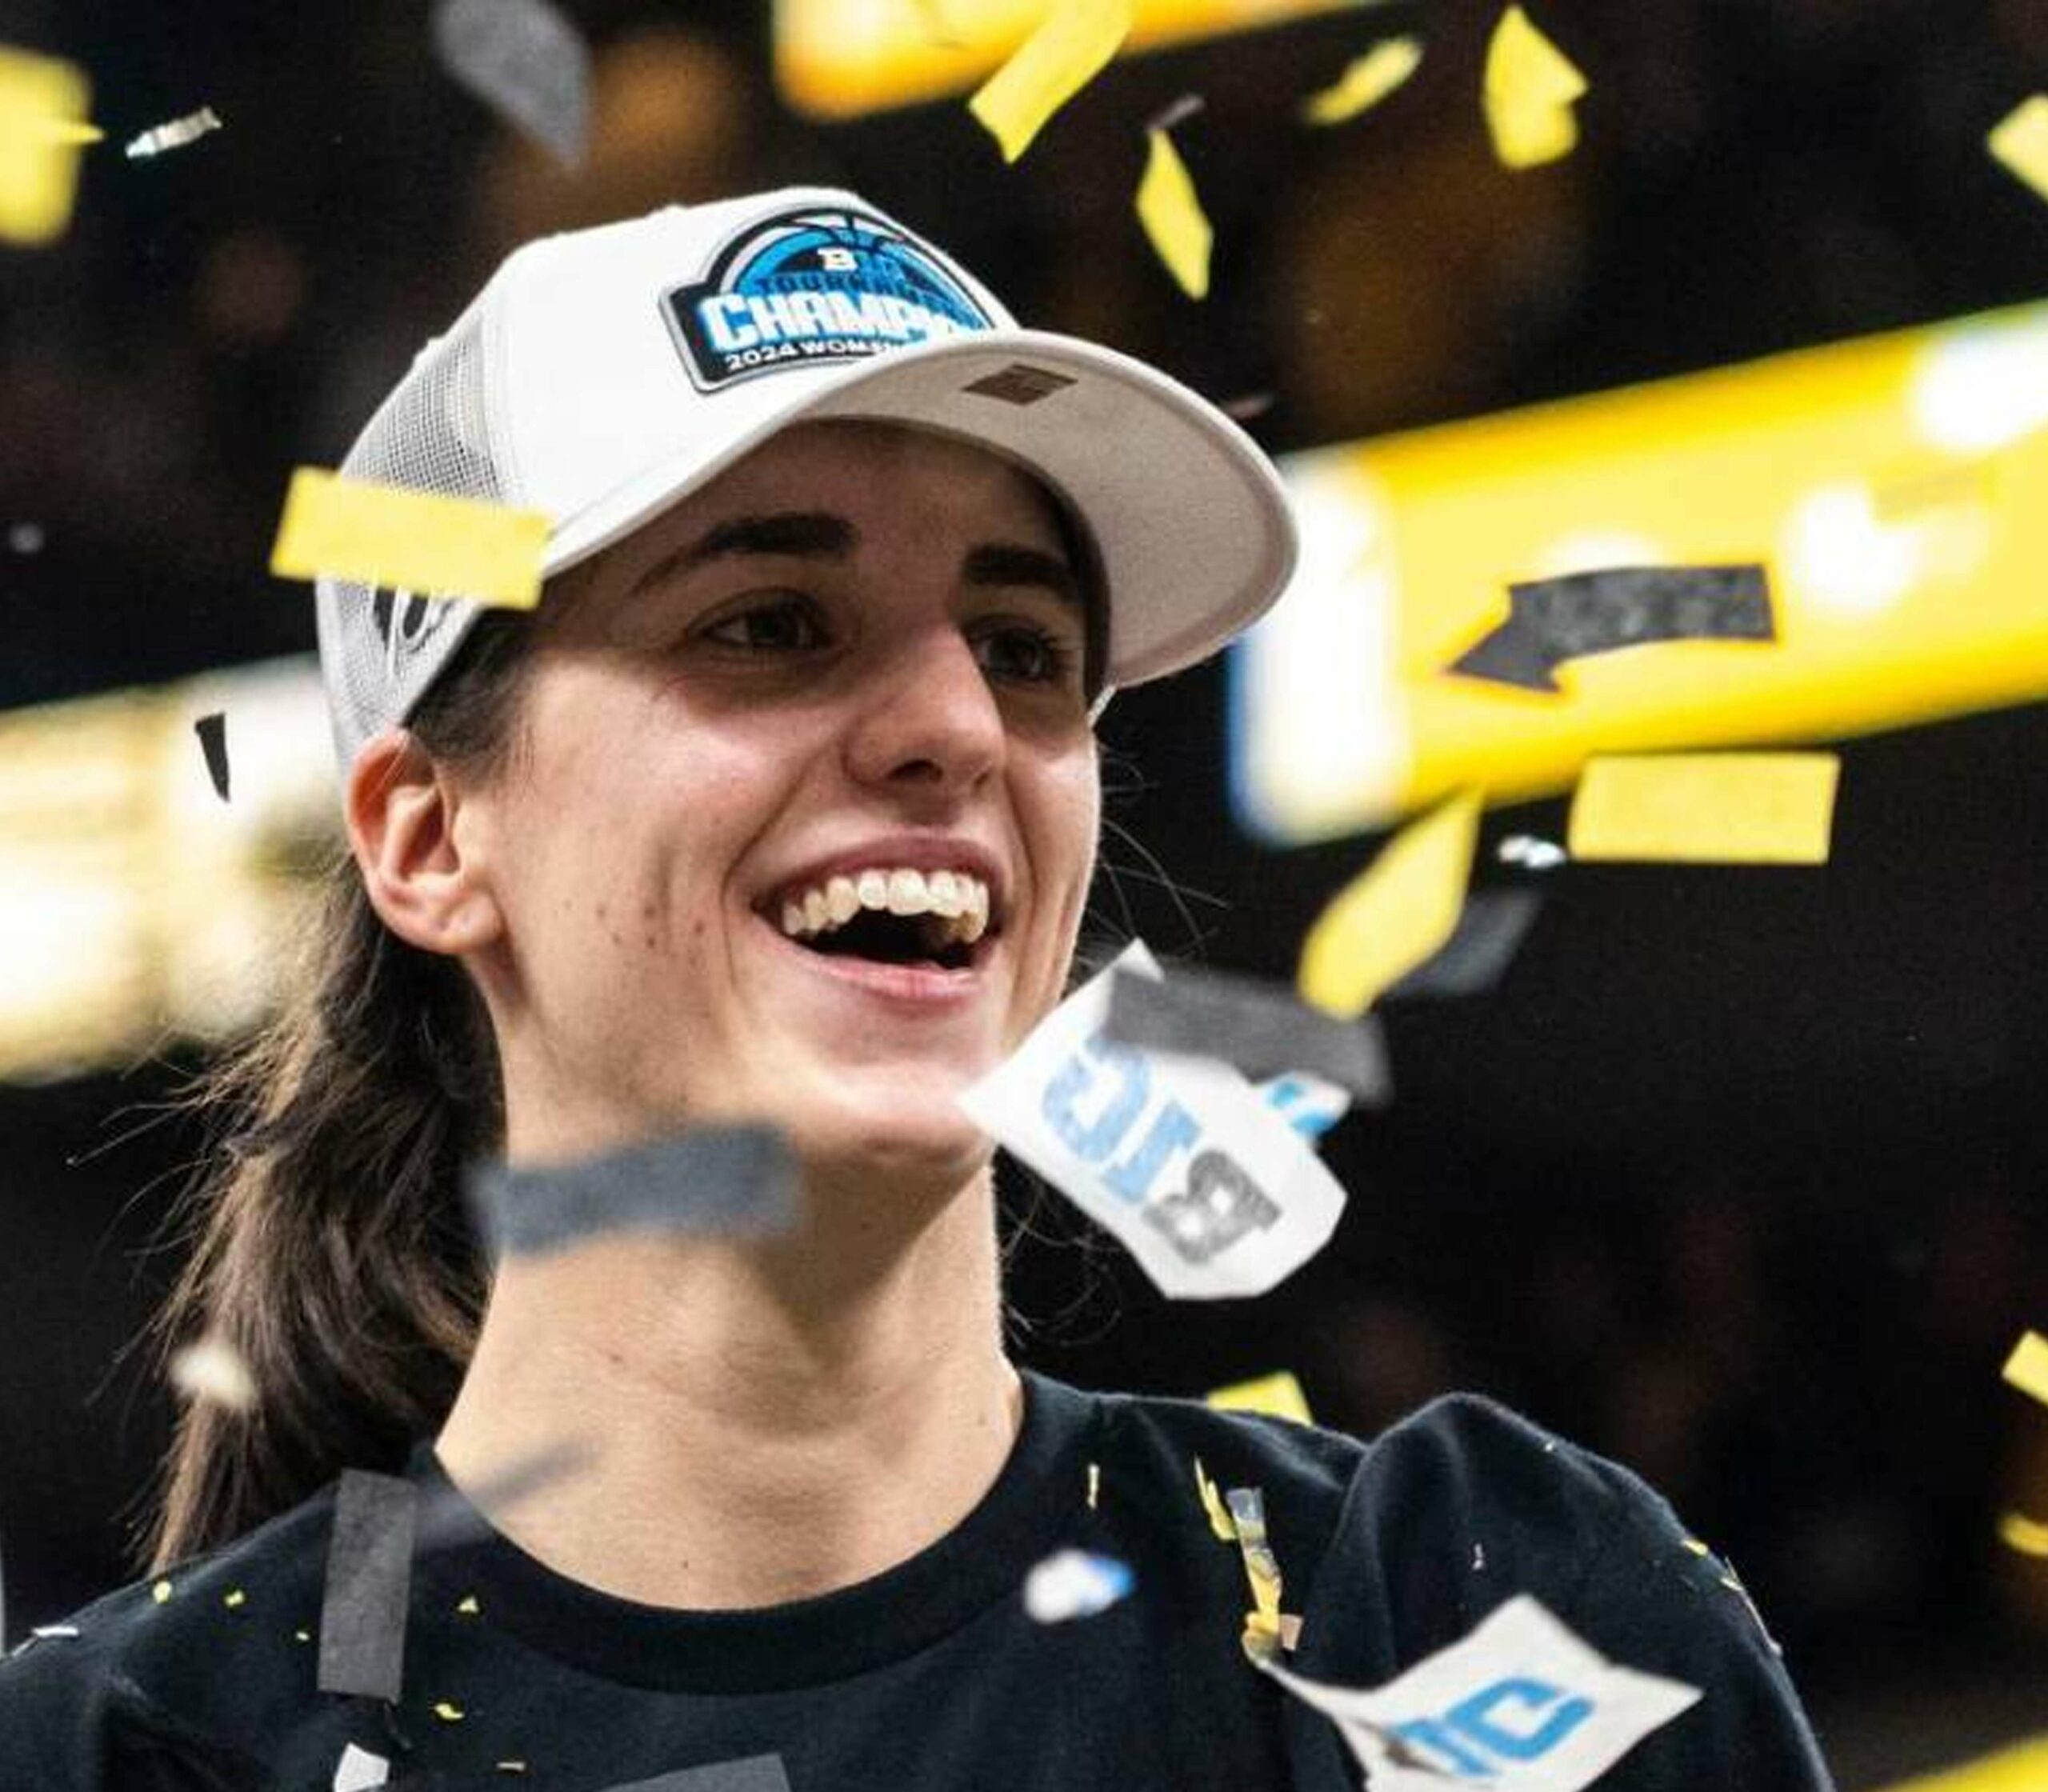 Caitlin Clark reproduces famous Kobe Bryant photo following her victory in the Big Ten championship.